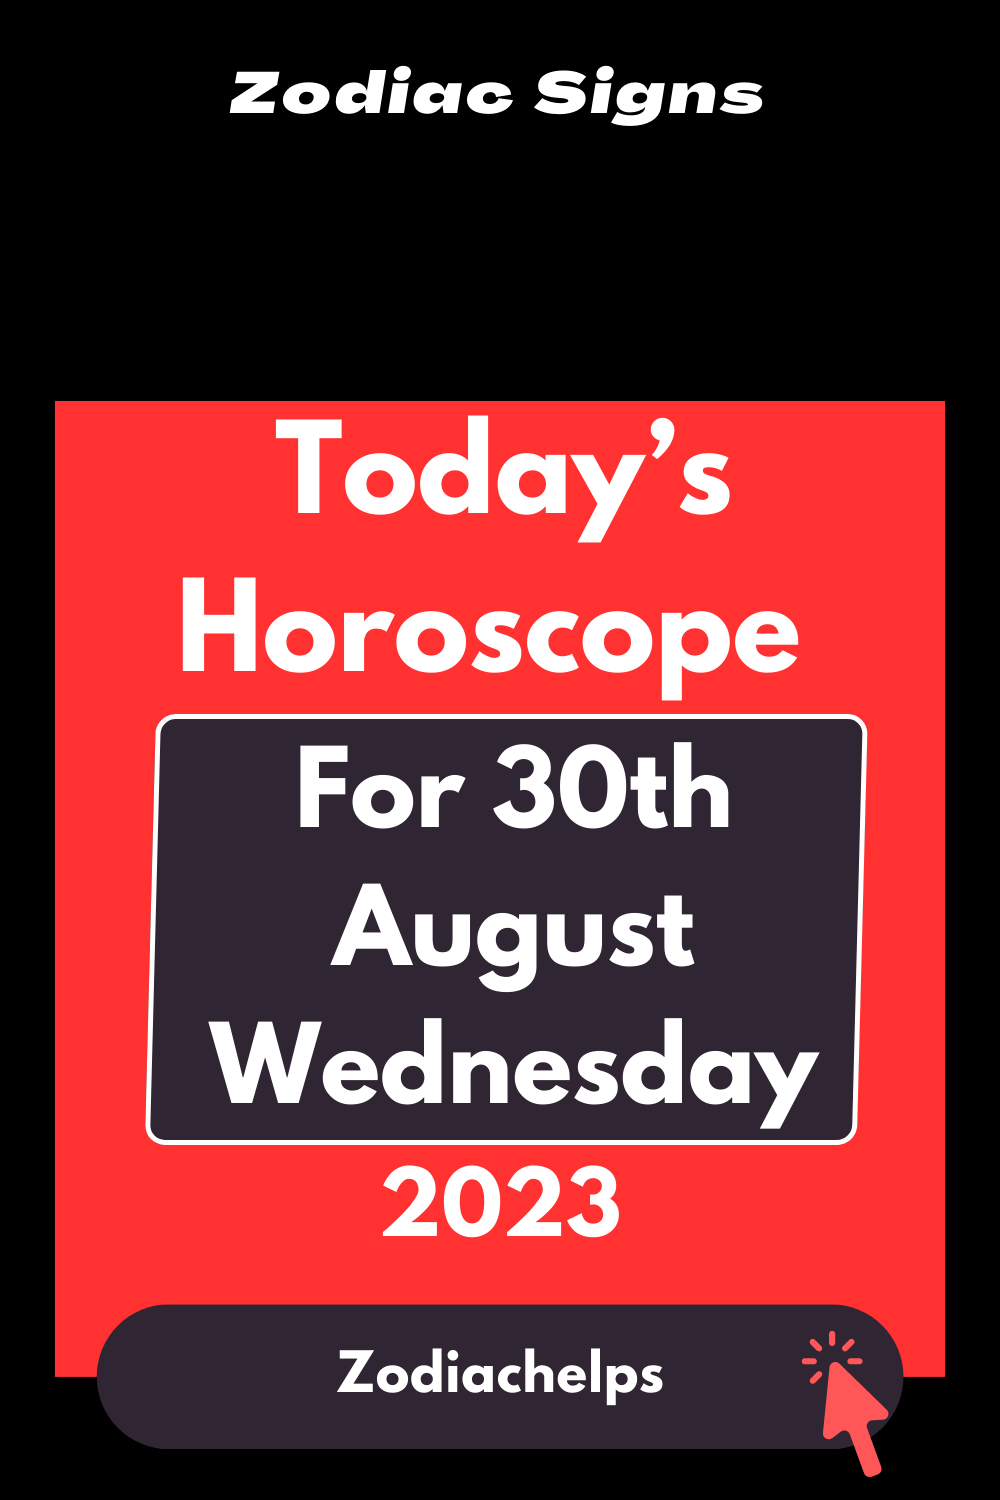 Today’s Horoscope for 30th August Wednesday, 2023